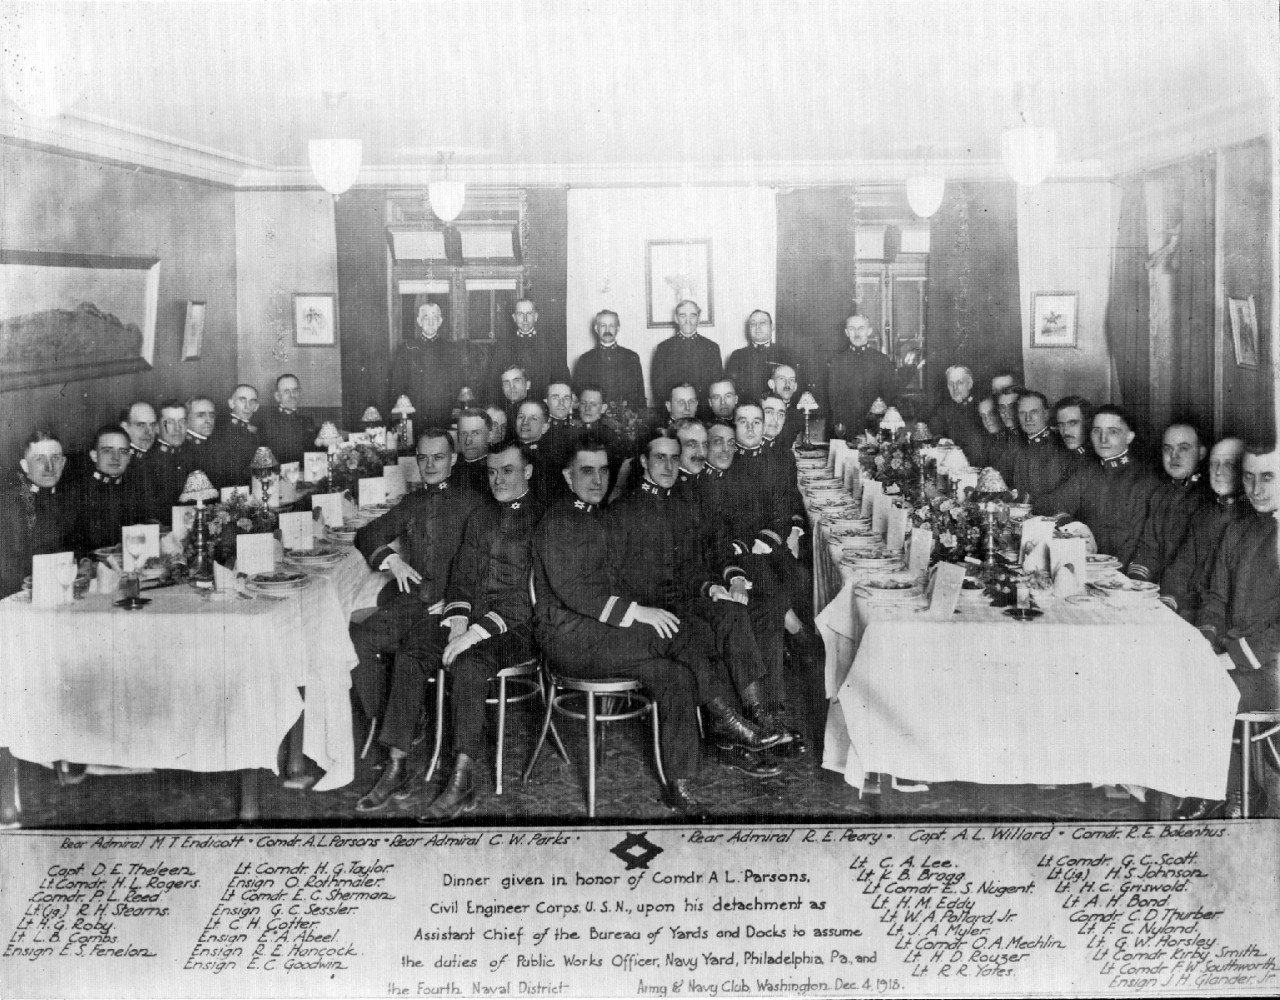 Officer’s Mess Night or “Dining-in” at the Army-Navy Club, Washington, D.C., December 4, 1913. The dinner was in honor of Commander Alan Parsons, CEC, USN, upon his detachment as Assistant Chief of the Bureau of Yards and Docks. Next, he assumed ...